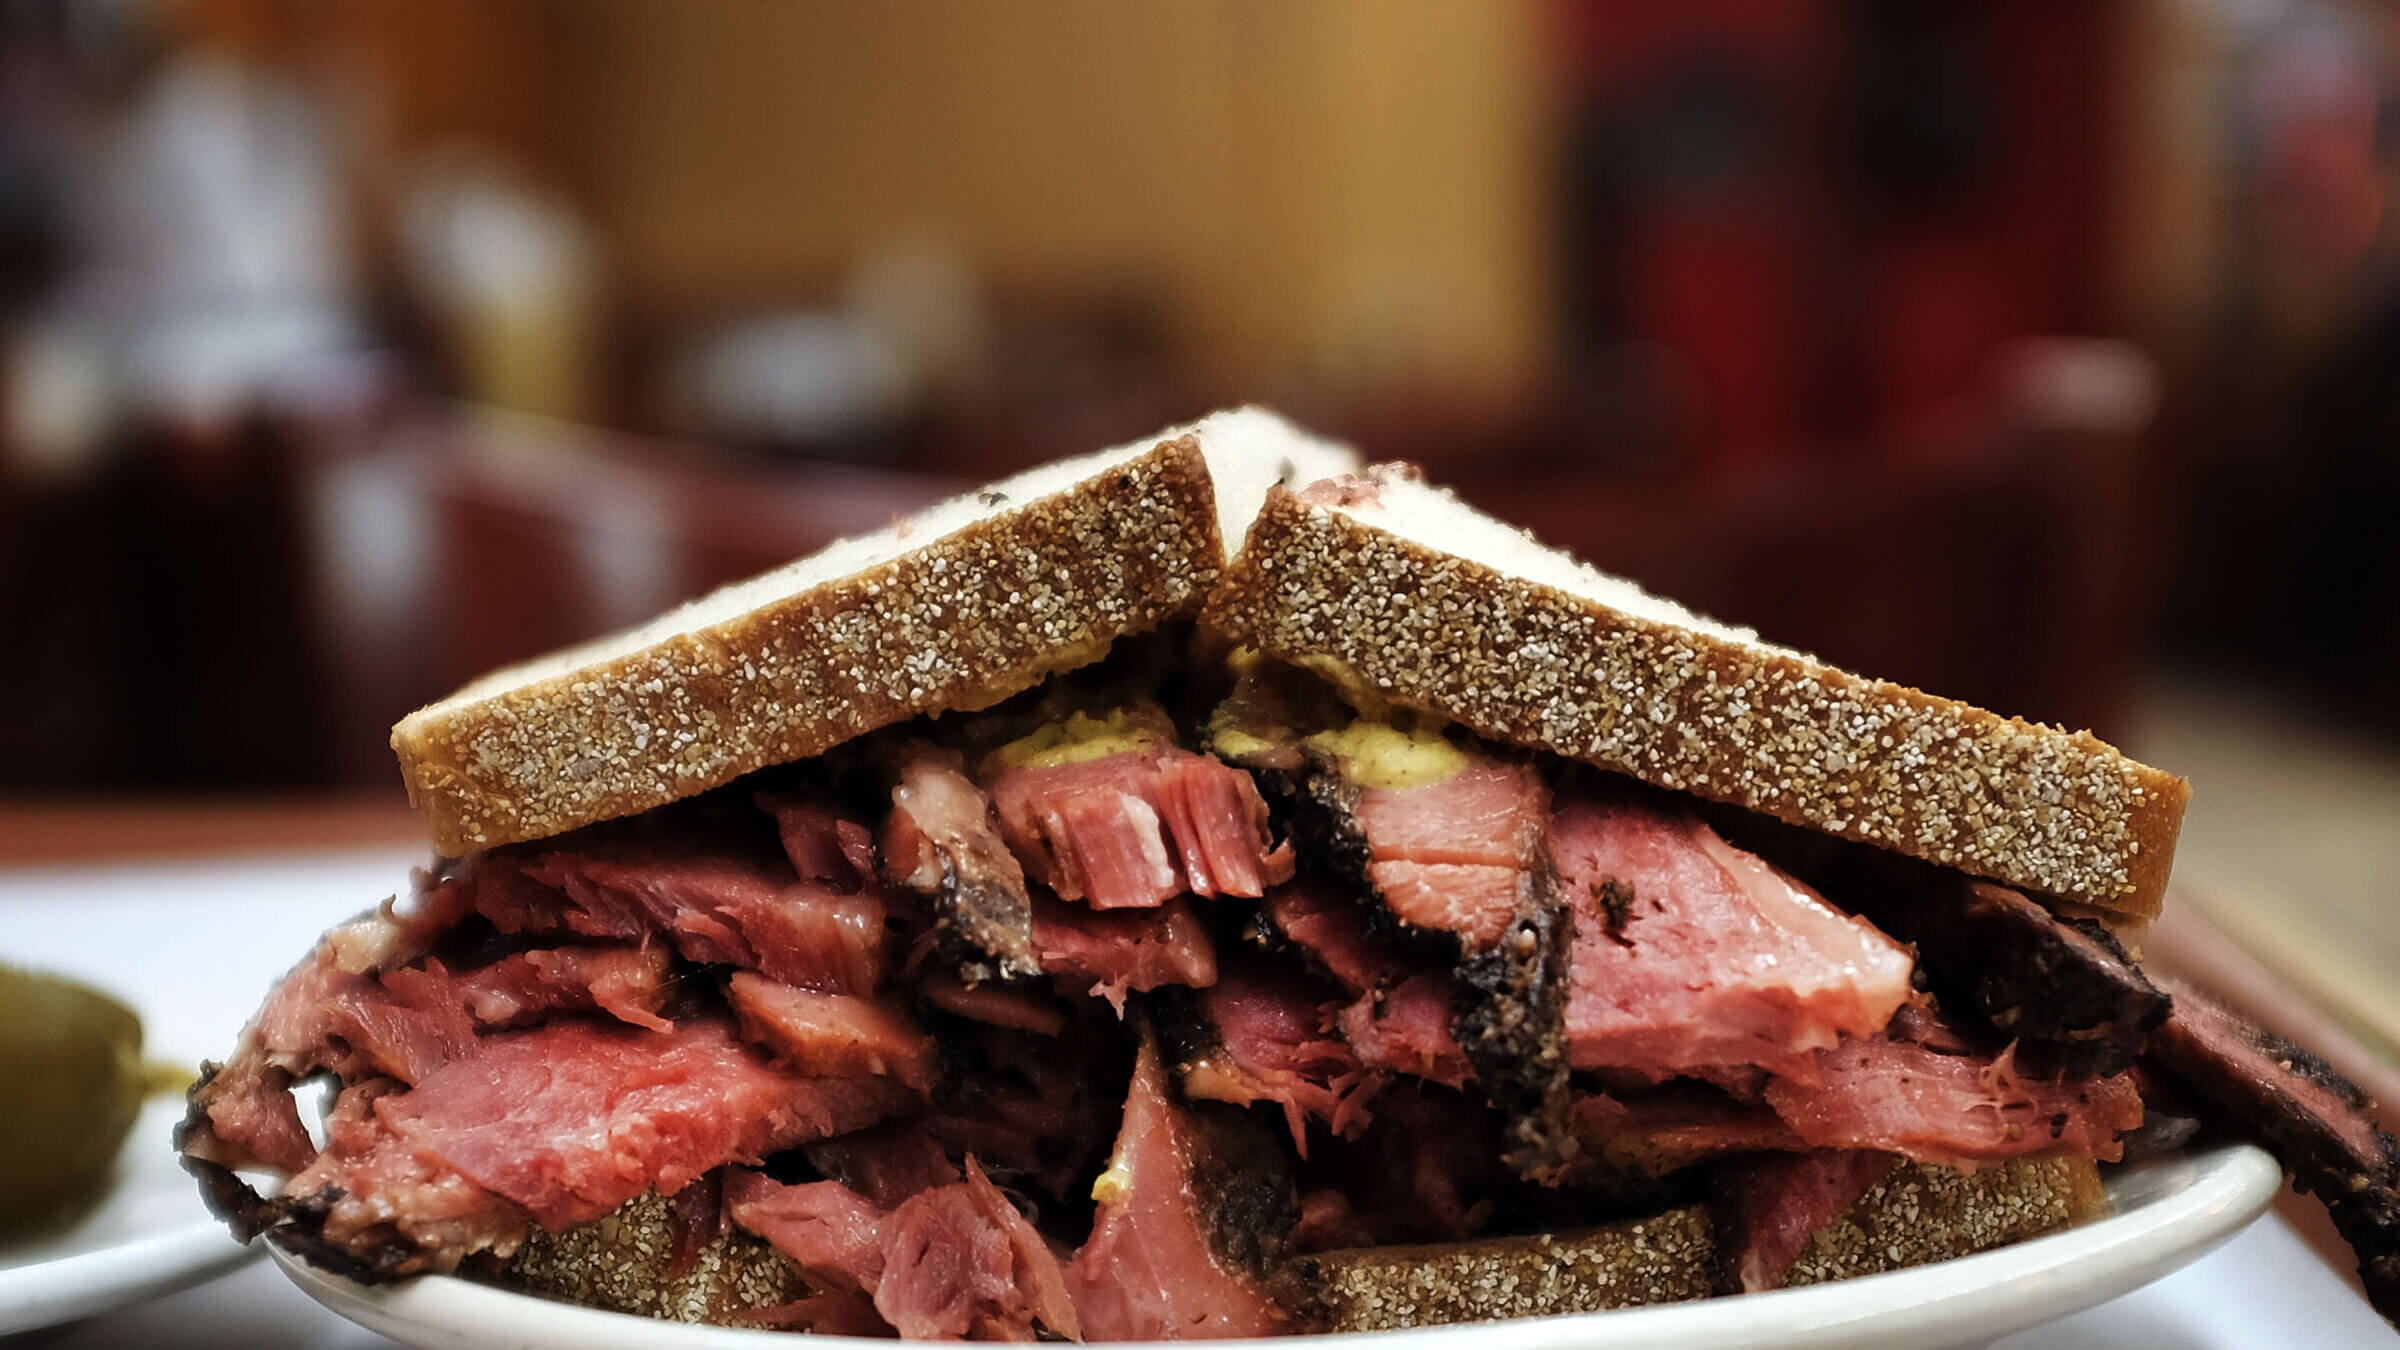 Does pastrami come from New York or Texas? – The Forward